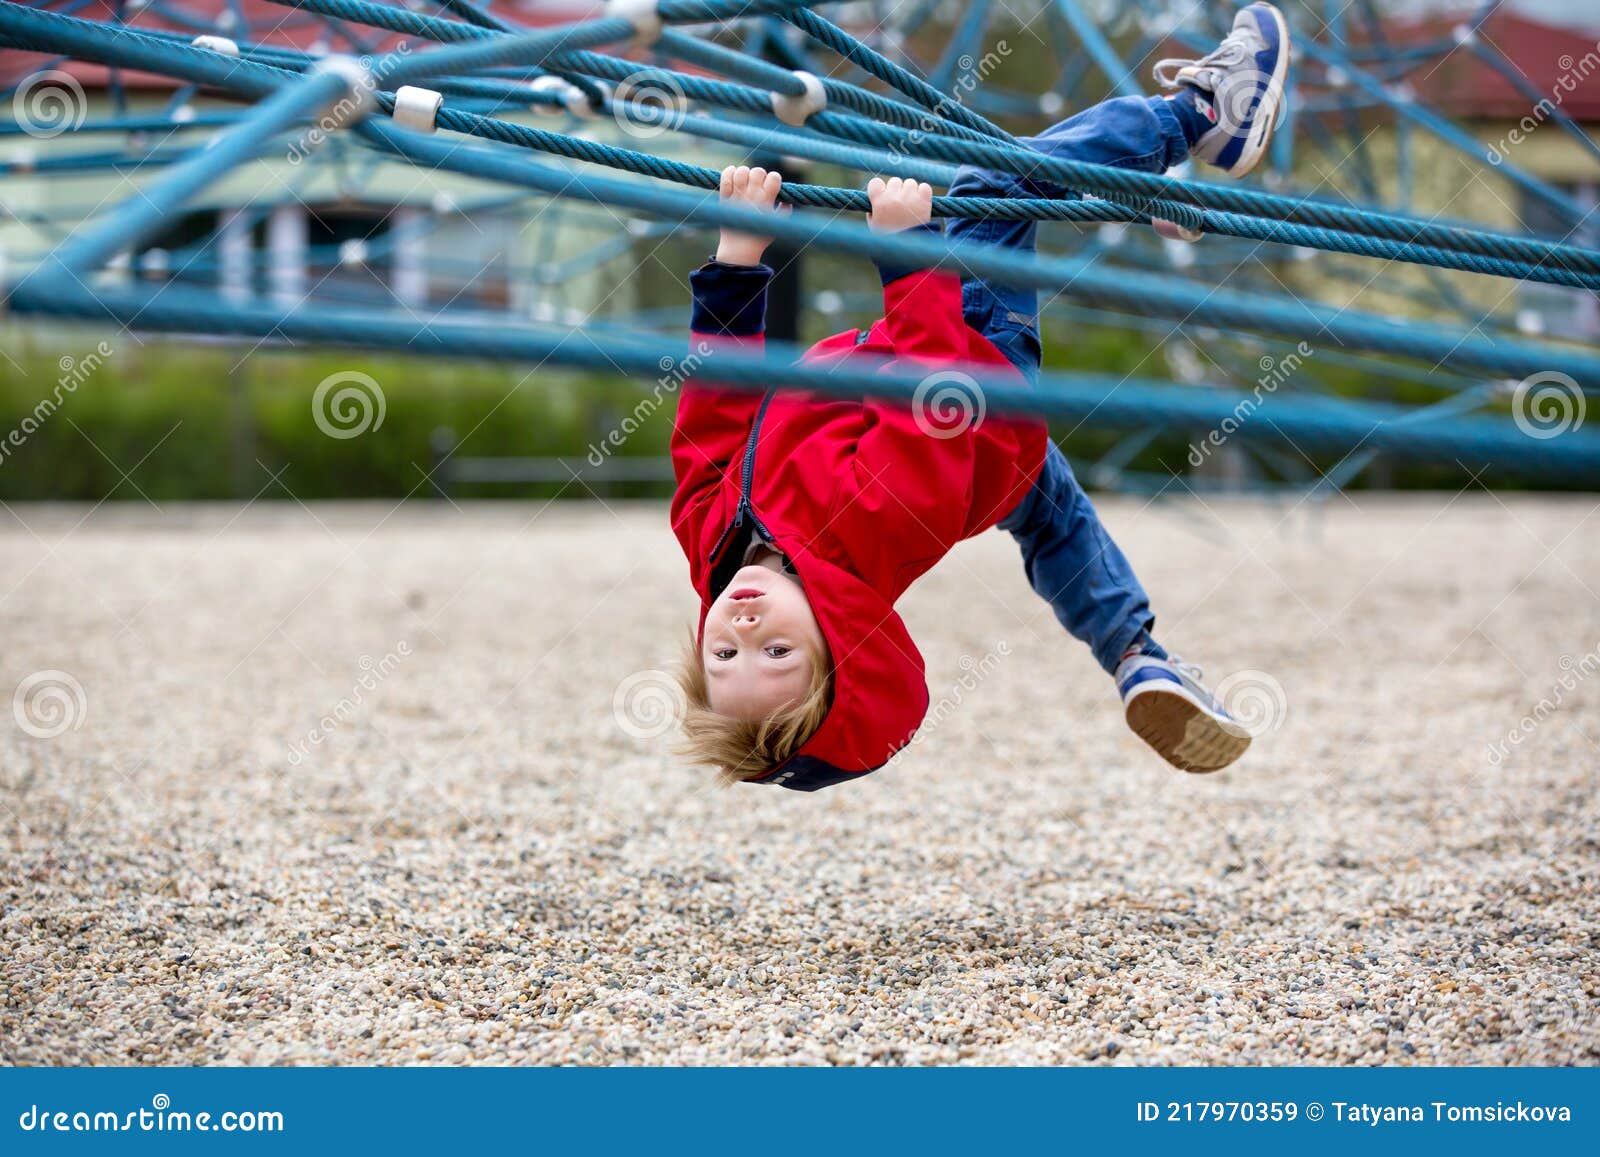 cute toddler boy, playing on the playground